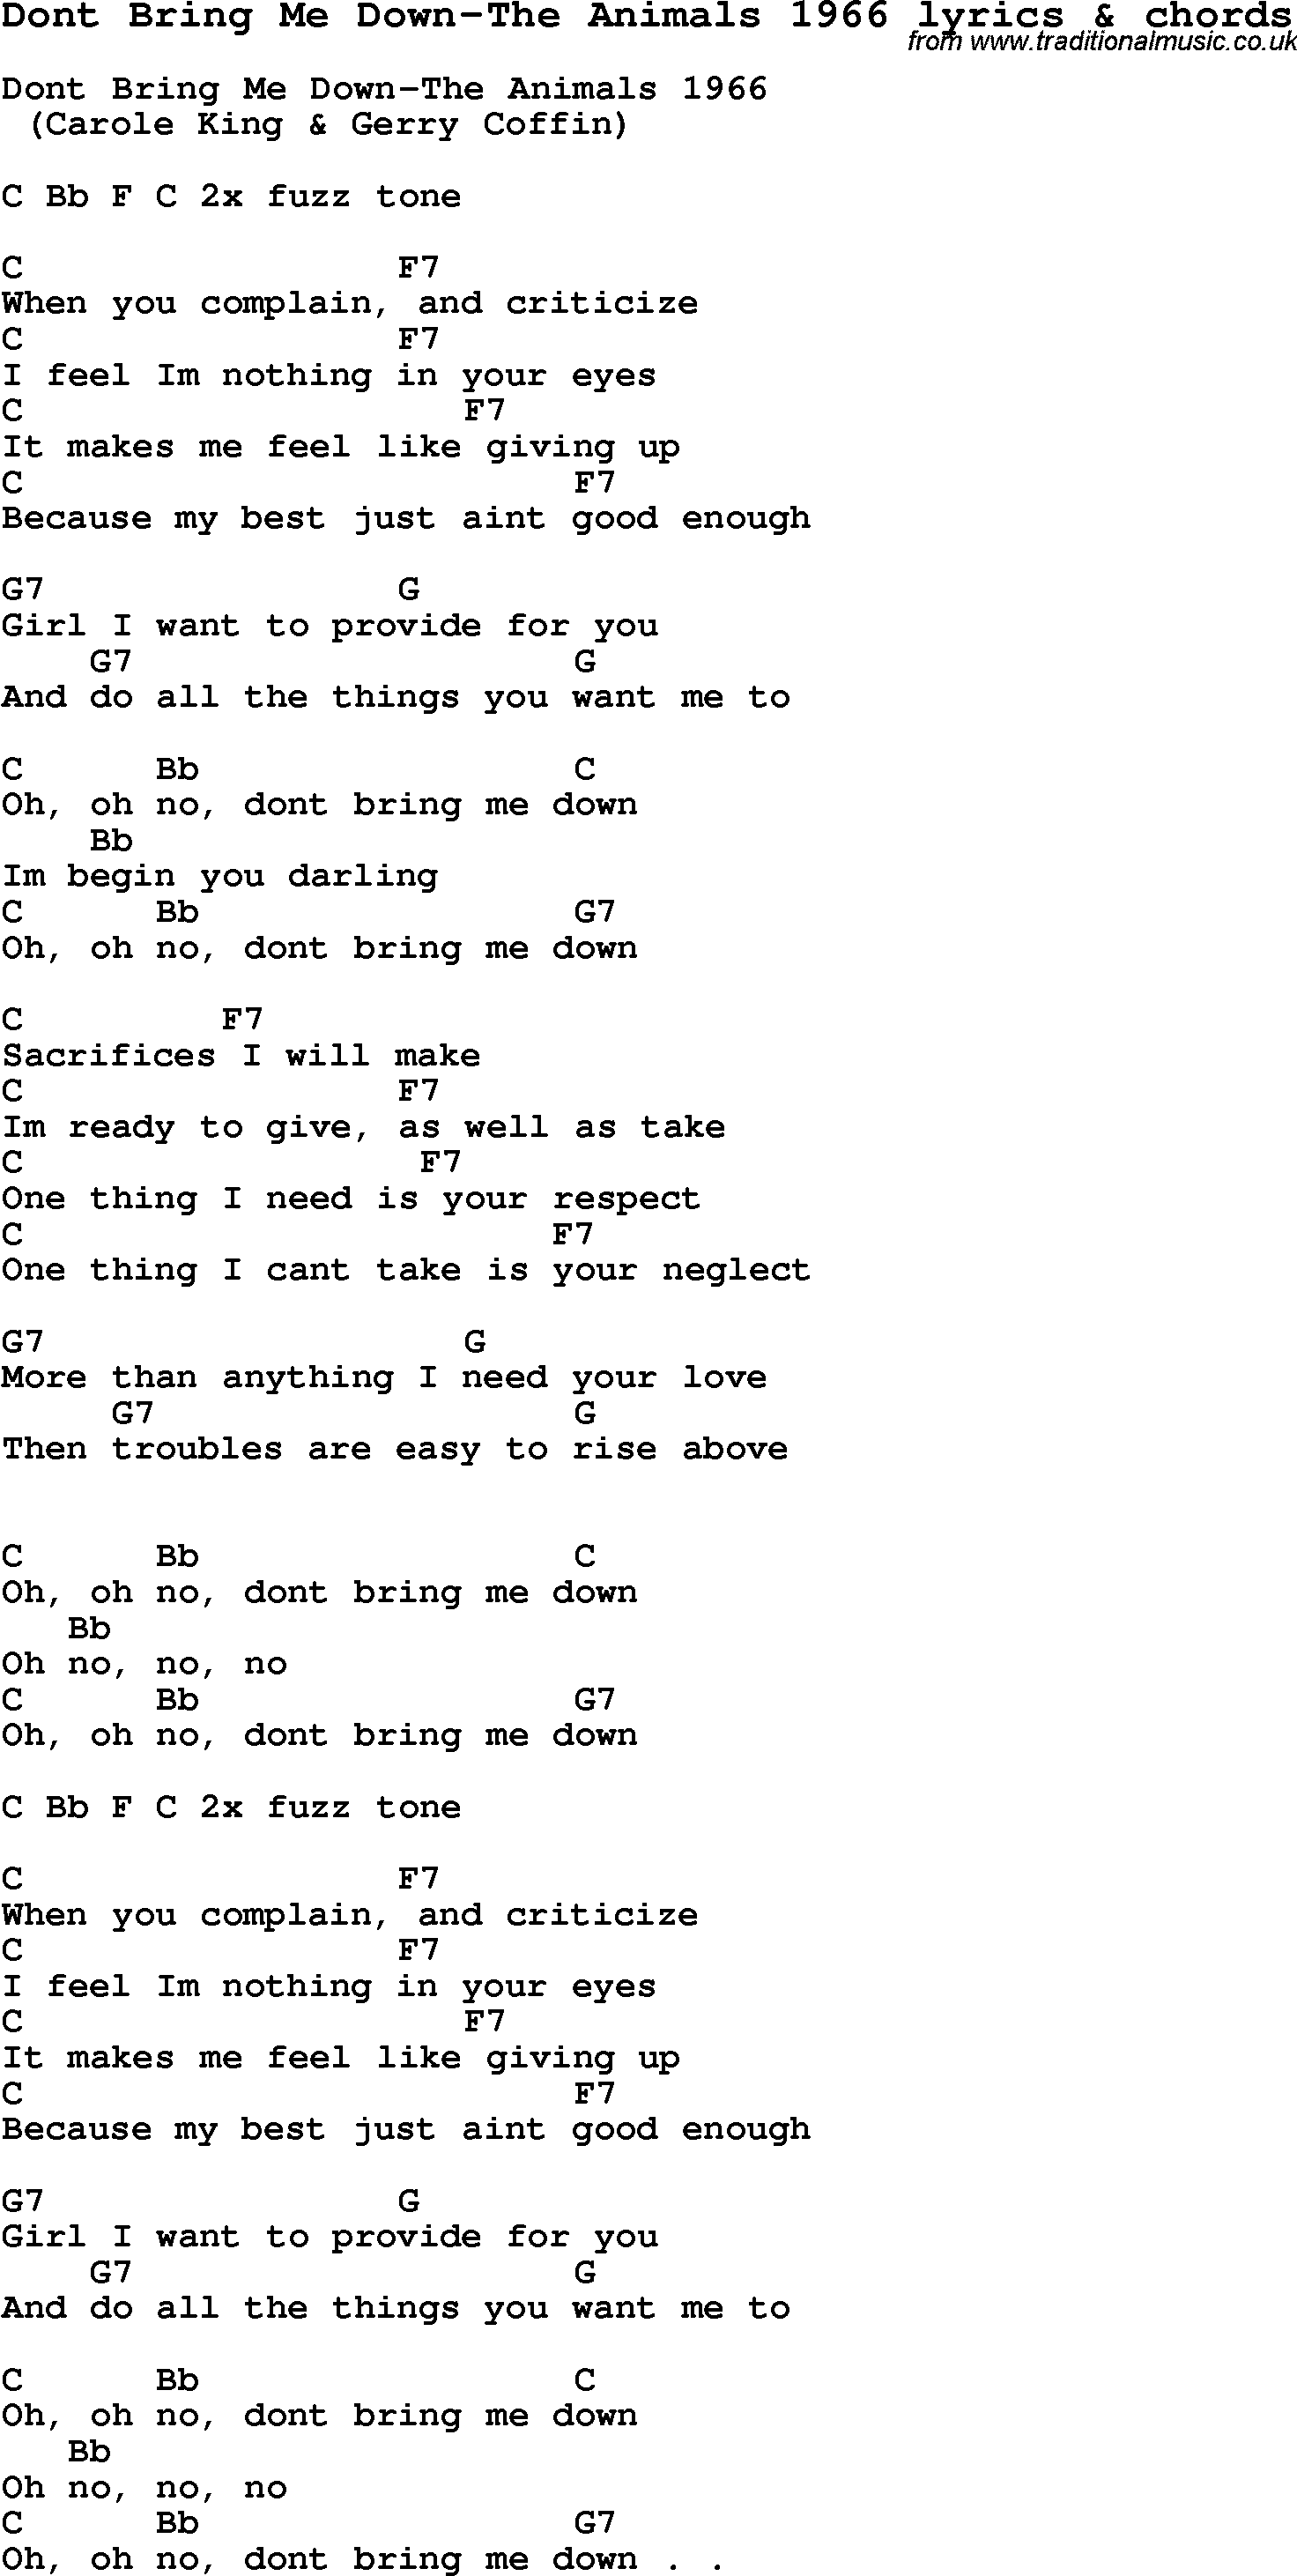 Love Song Lyrics for: Dont Bring Me Down-The Animals 1966 with chords for Ukulele, Guitar Banjo etc.